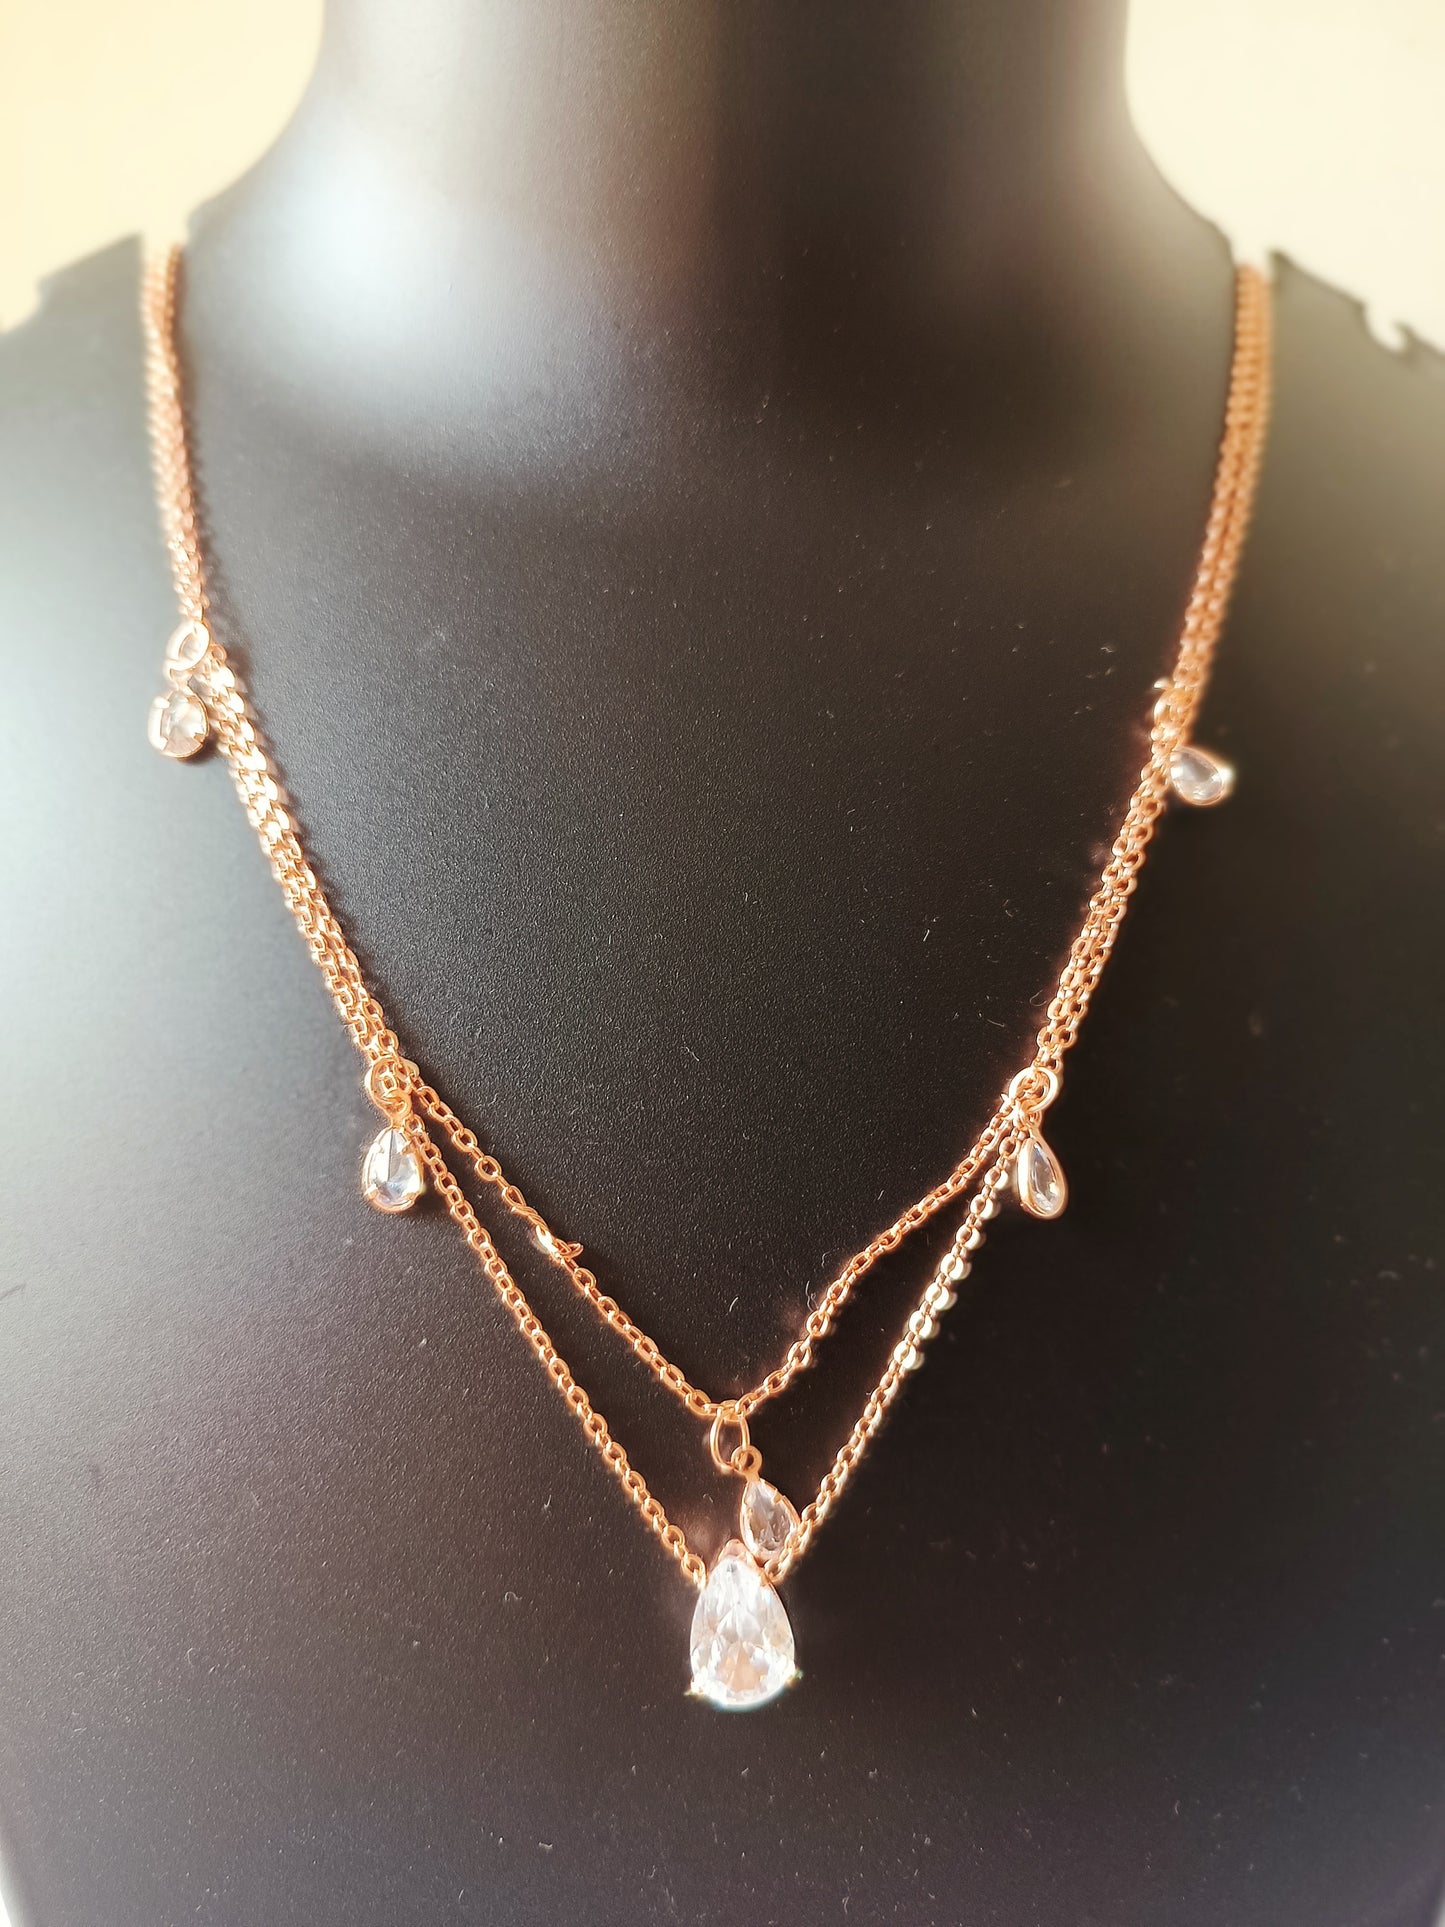 Double layered rose-gold plated raindrop neckpiece - Jewellery for women and girls